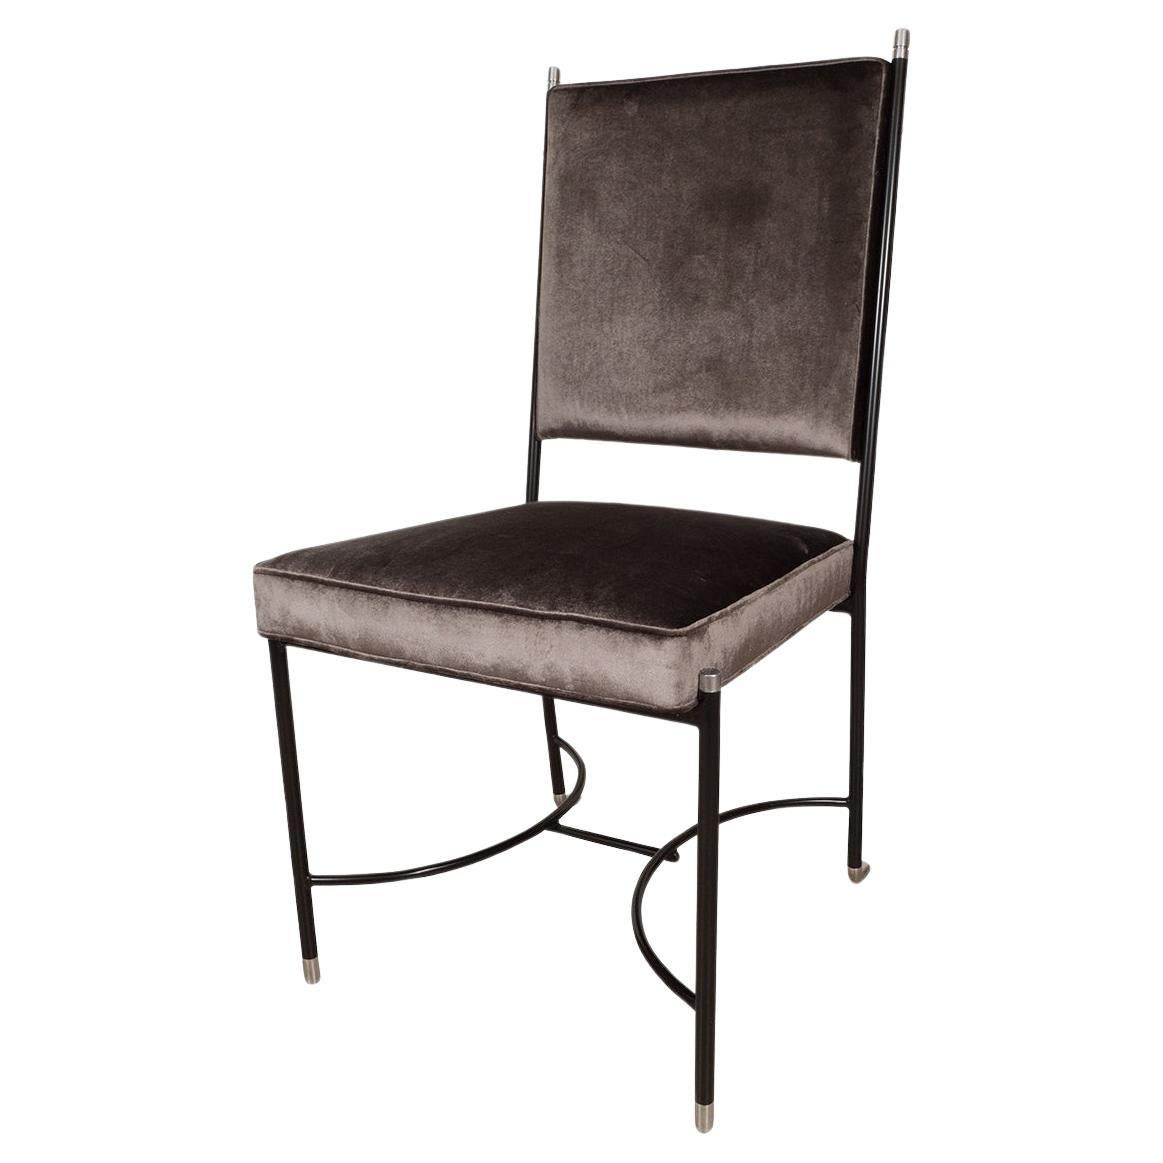 Upholstered desk chair with stylized blackened frame